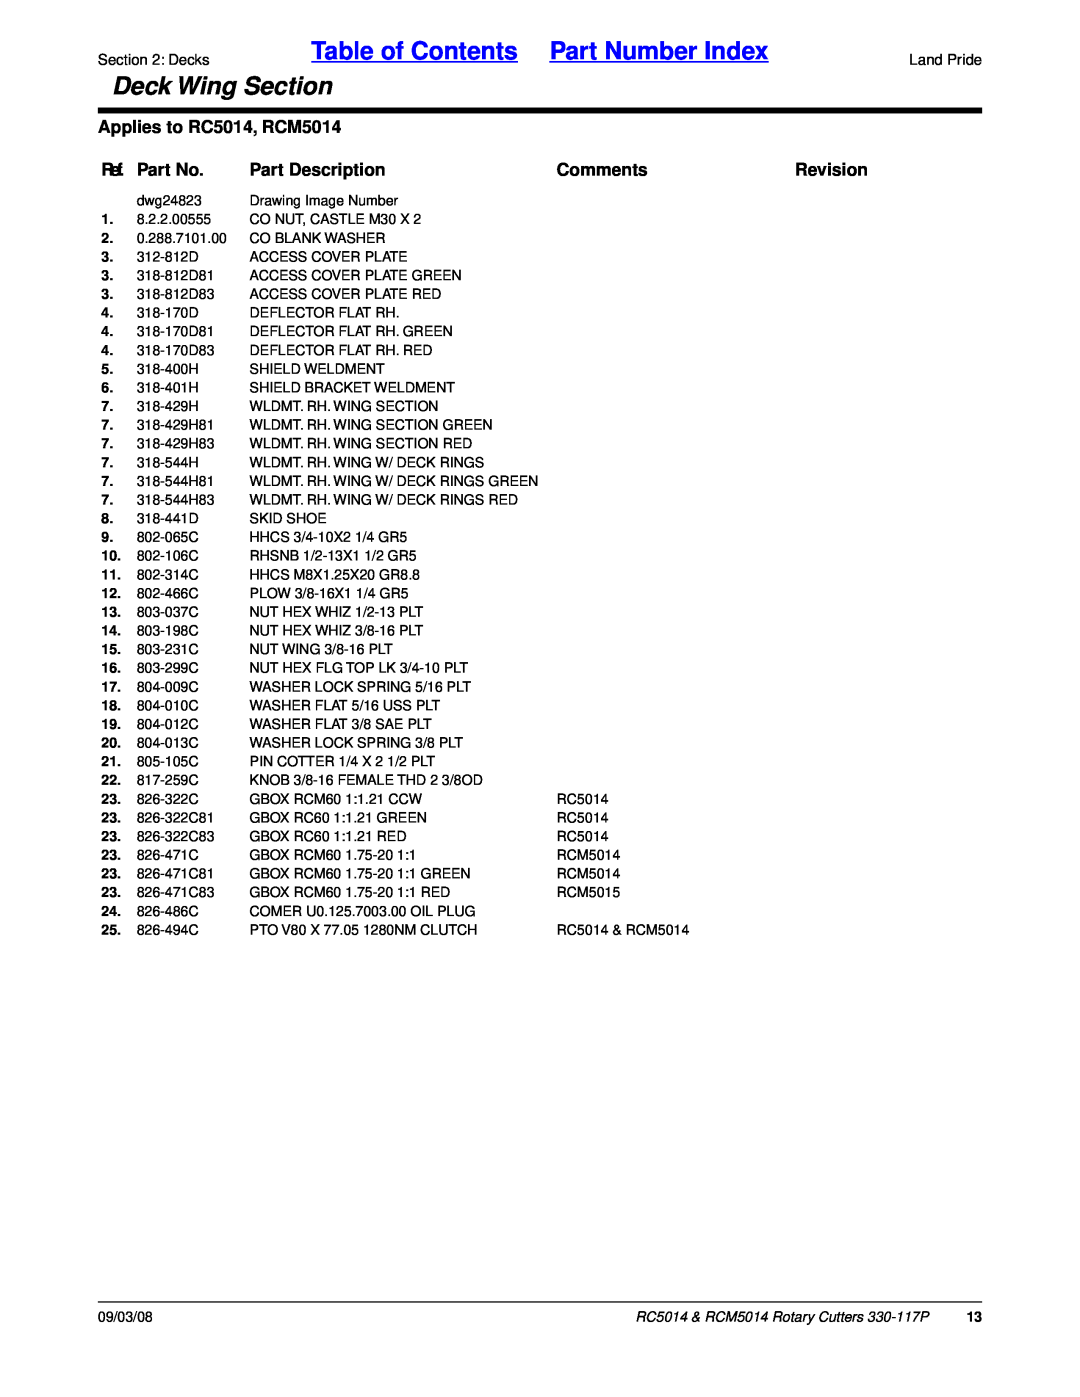 Land Pride Table of Contents Part Number Index, Deck Wing Section, Applies to RC5014, RCM5014, Ref. Part No, Comments 